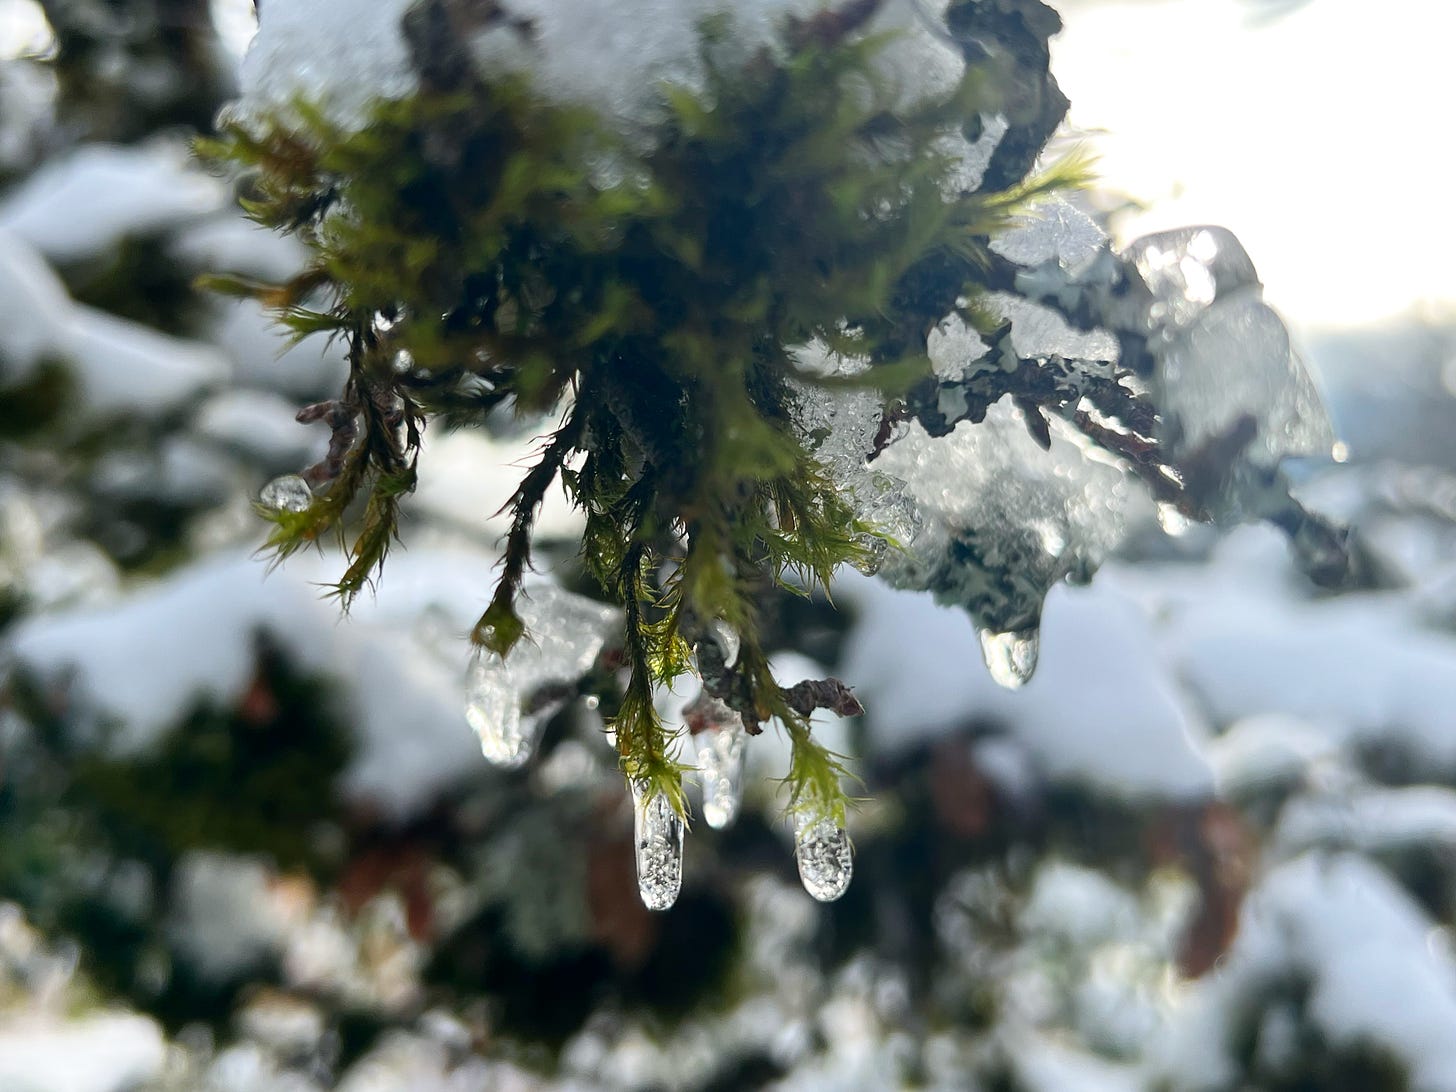 Ice beads dangle from a snow-covered tuft of moss.